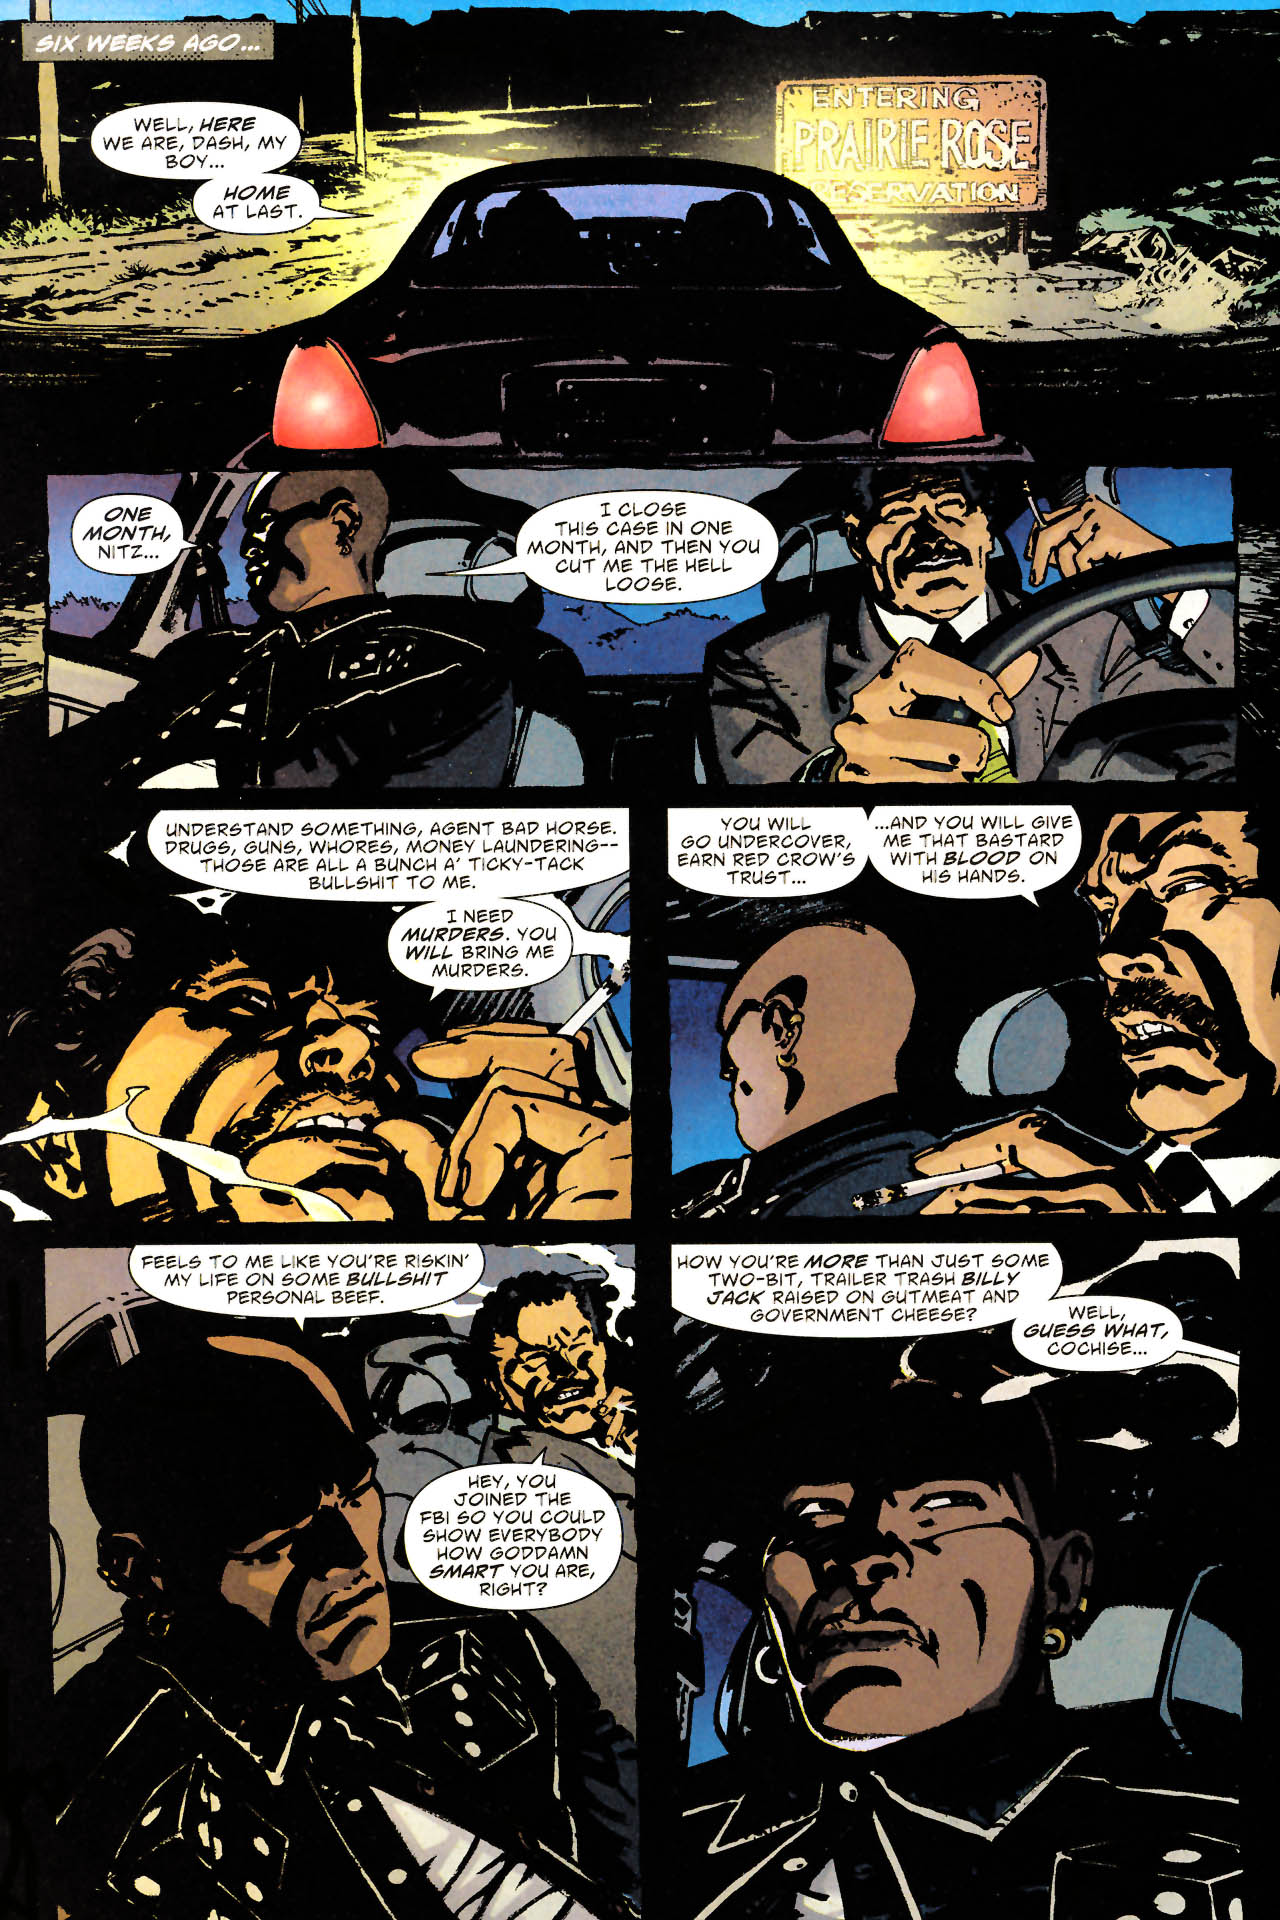 Scalped #6 - Casino Boogie, Part 1 of 6: The Man Who Fights the Bull